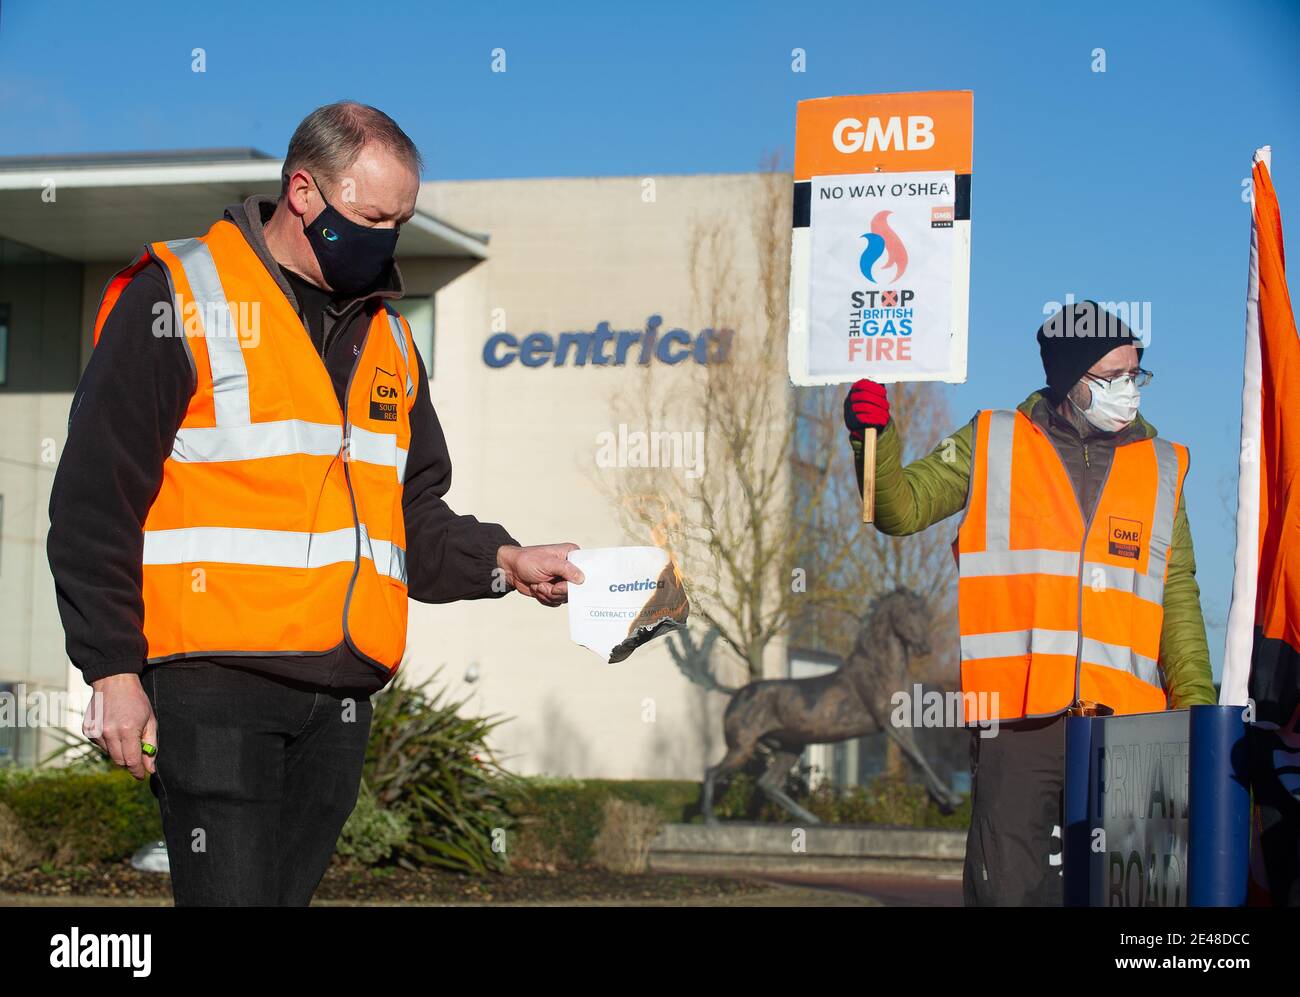 Windsor, Berkshire, UK. 22nd January, 2021. Day six of the British Gas strike was ‘rock solid’ as an estimated 7,000 workers downed tools over the company’s plan to sack them all. This morning British Gas Engineers burnt their “sign or be fired” contracts outside the head office of parent company Centrica. British Gas engineers and staff voted overwhelmingly by 89%  to strike after the boss of parent company Centrica Chris O’Shea, threatened to fire them all if they didn’t “accept” cuts to pay and terms and conditions. Credit: Maureen McLean/Alamy Live News Stock Photo